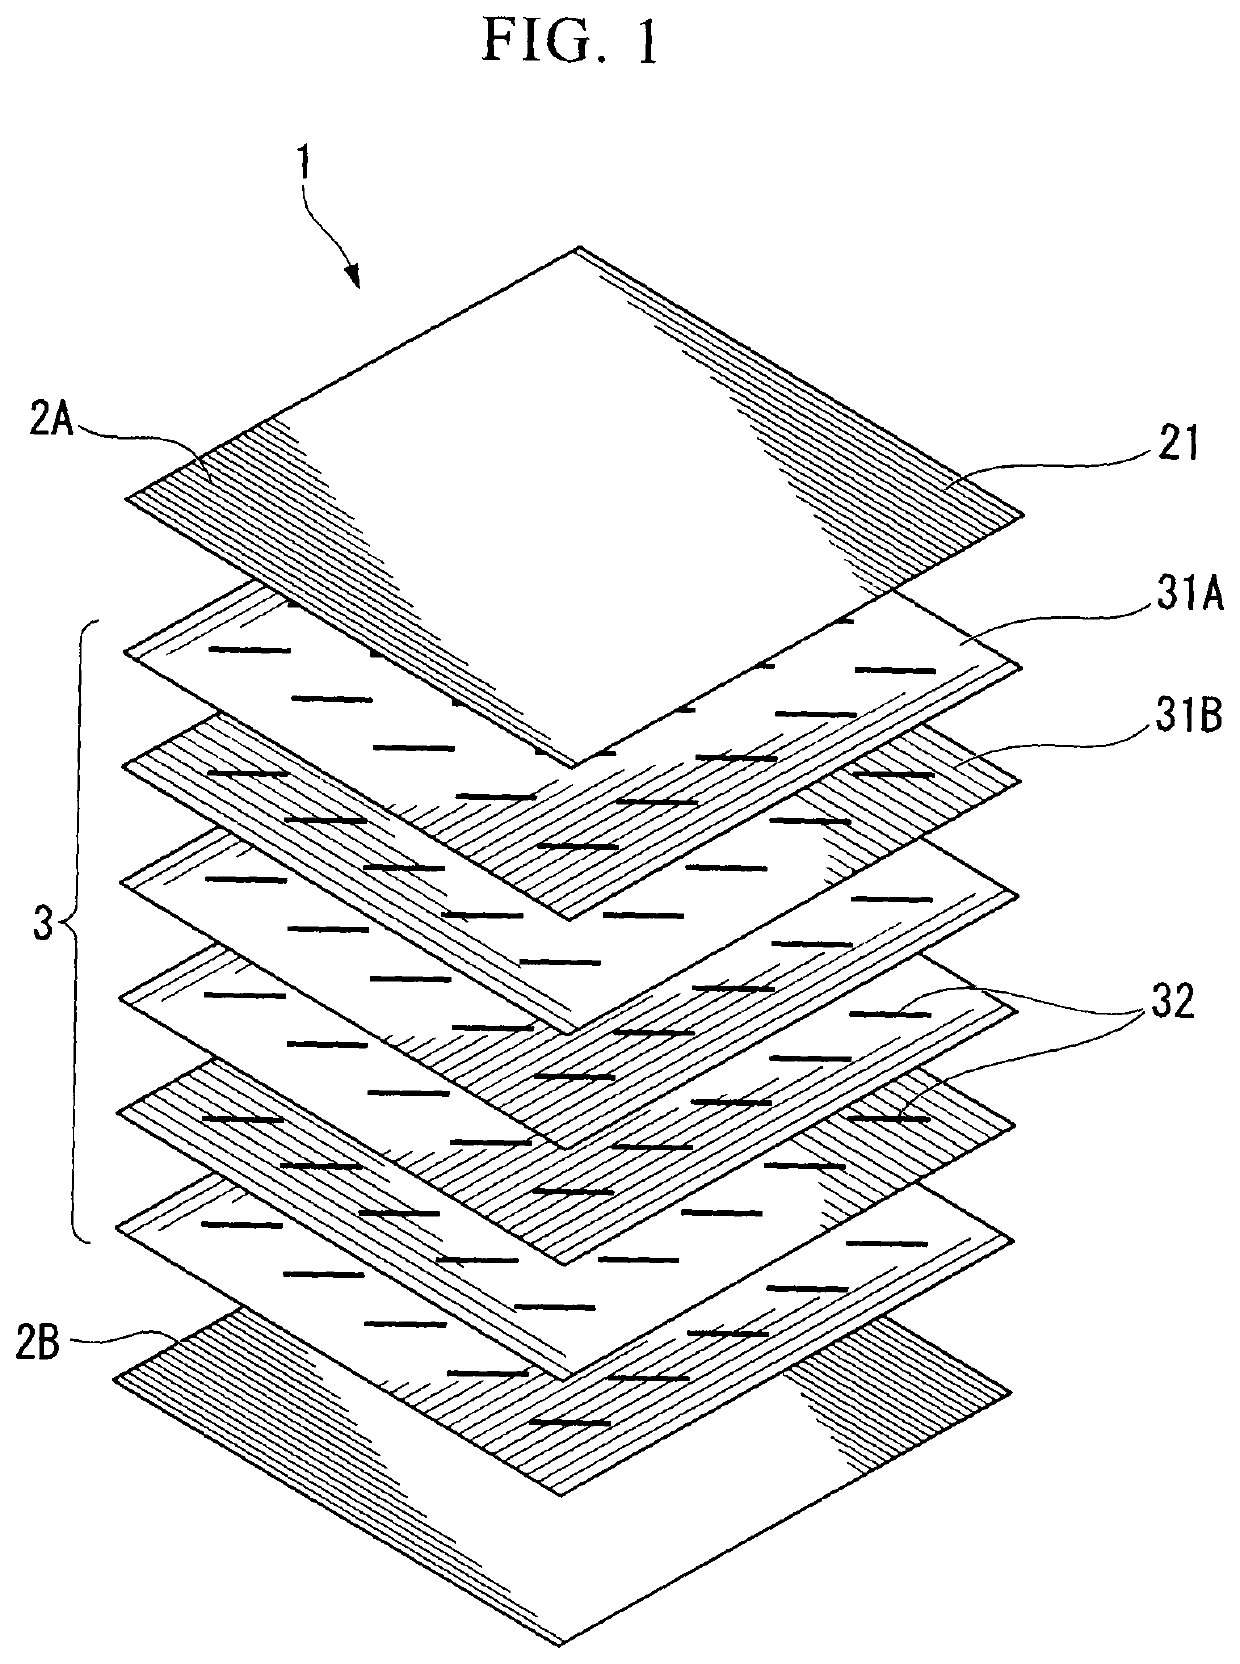 Carbon-fiber-reinforced thermoplastic-resin composite material and molded body using the same